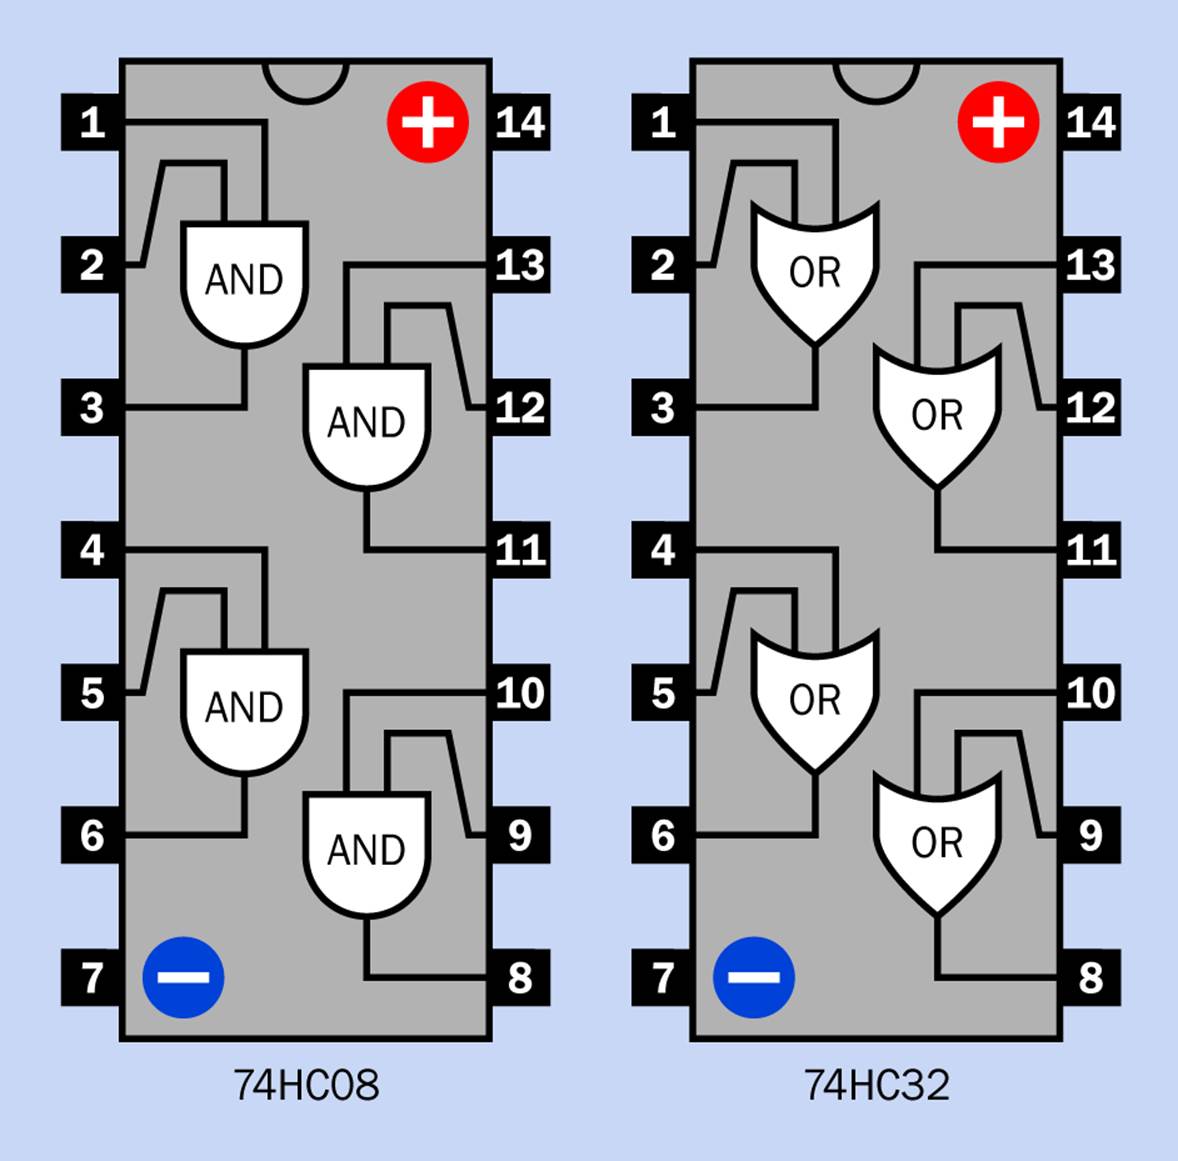 Each 14-pin logic chip can contain four separate two-input AND or OR logic gates, as shown here. These types of chips are referred to as quad two-input.